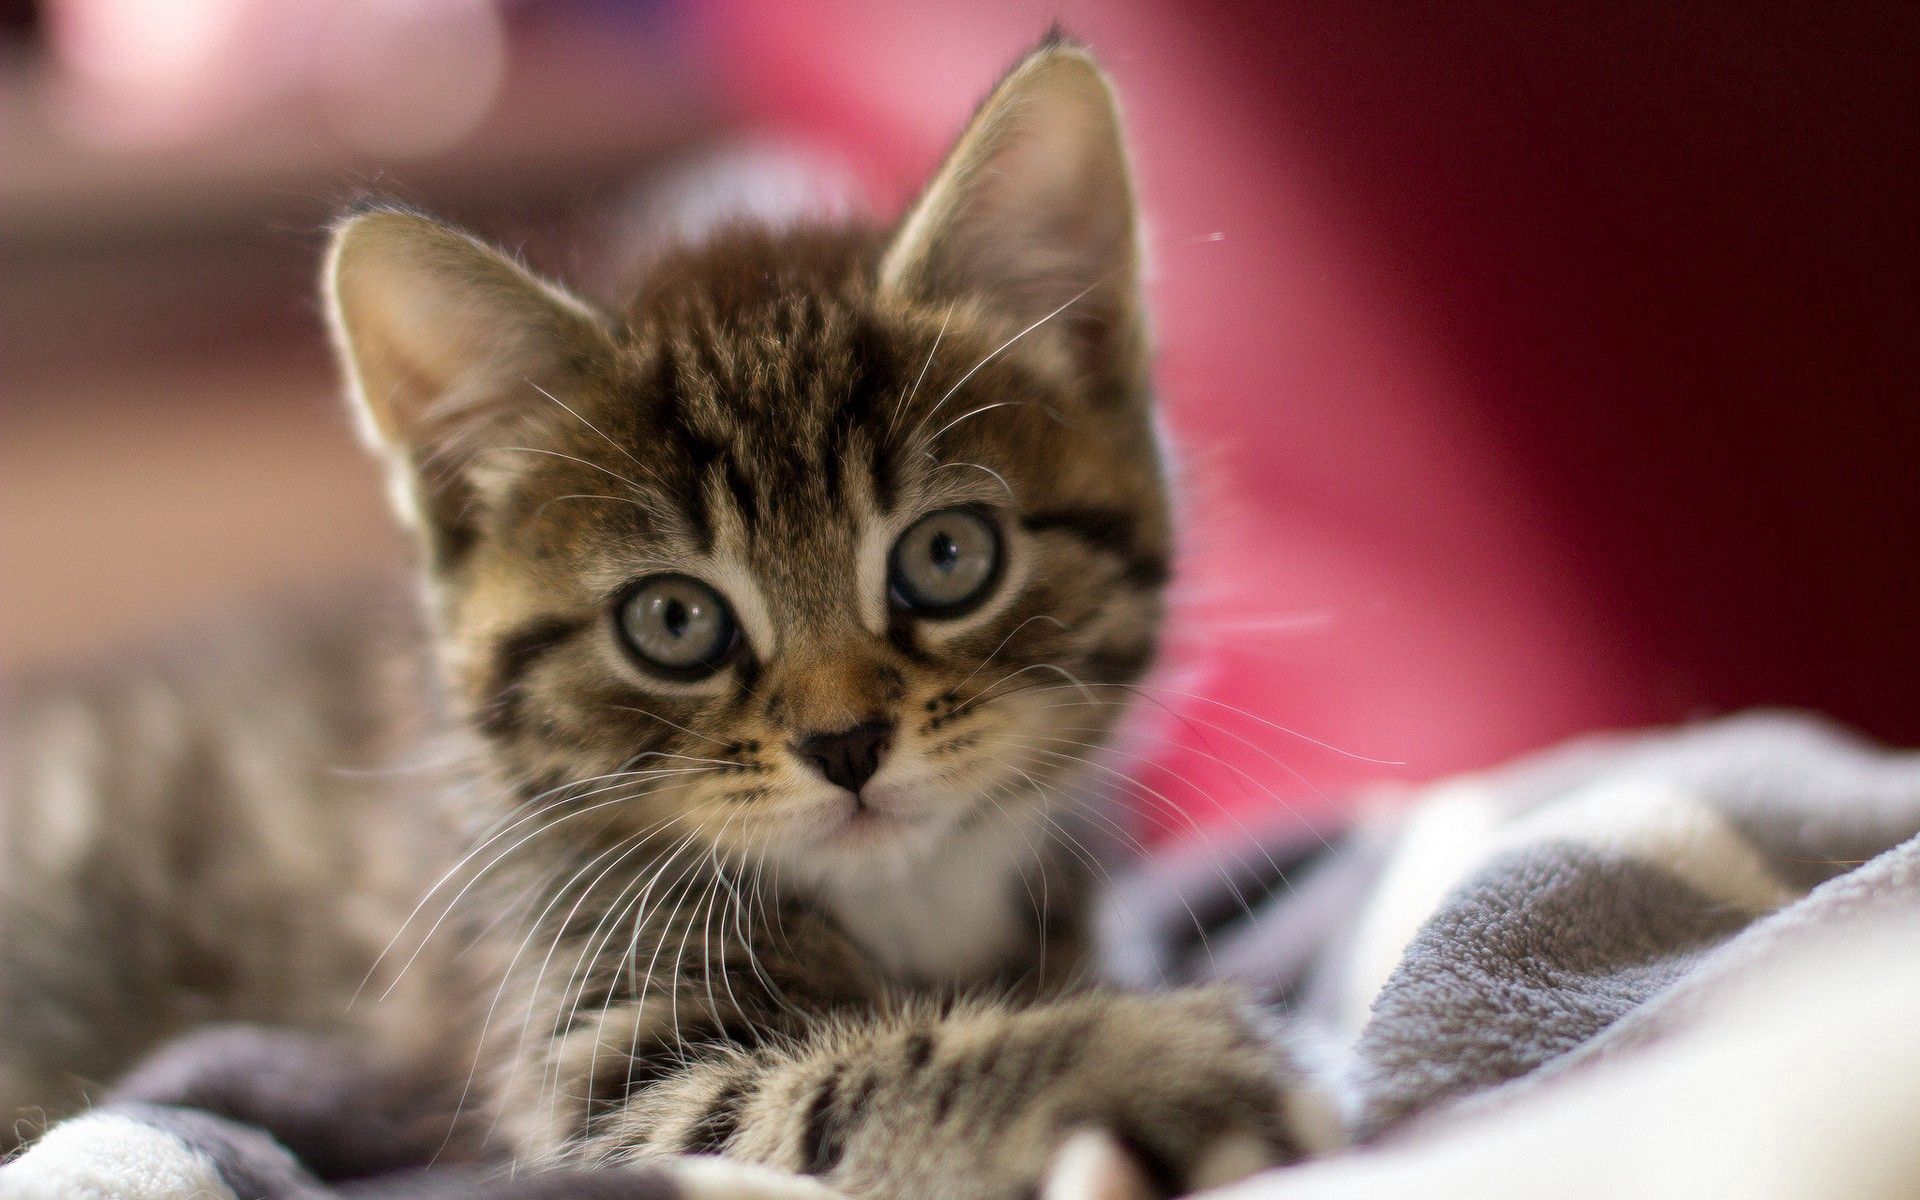 114073 3840x2160 PC pictures for free, download kitten, muzzle, kitty, striped 3840x2160 wallpapers on your desktop